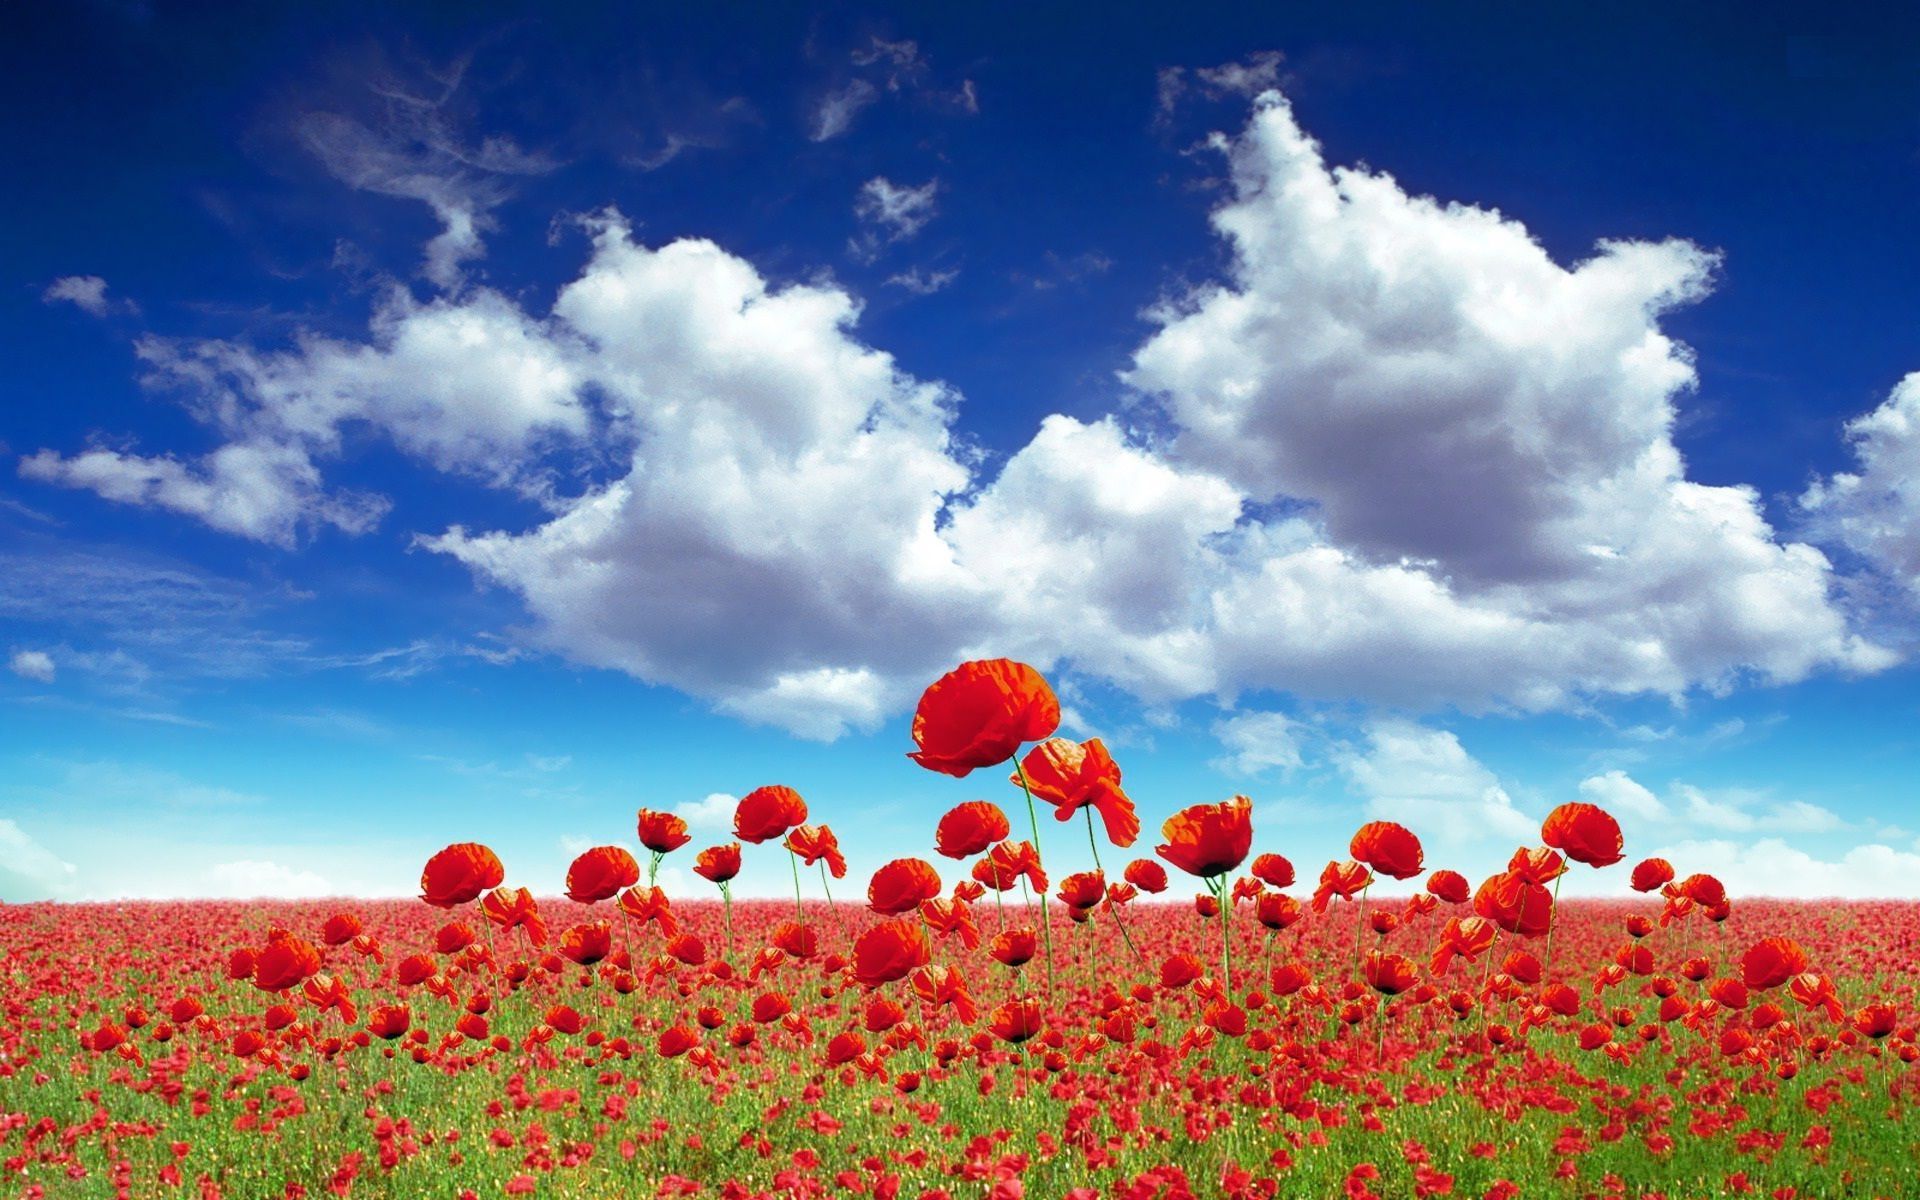 Field of Flowers HD Wallpaper | Wallpapers, Backgrounds, Images ...